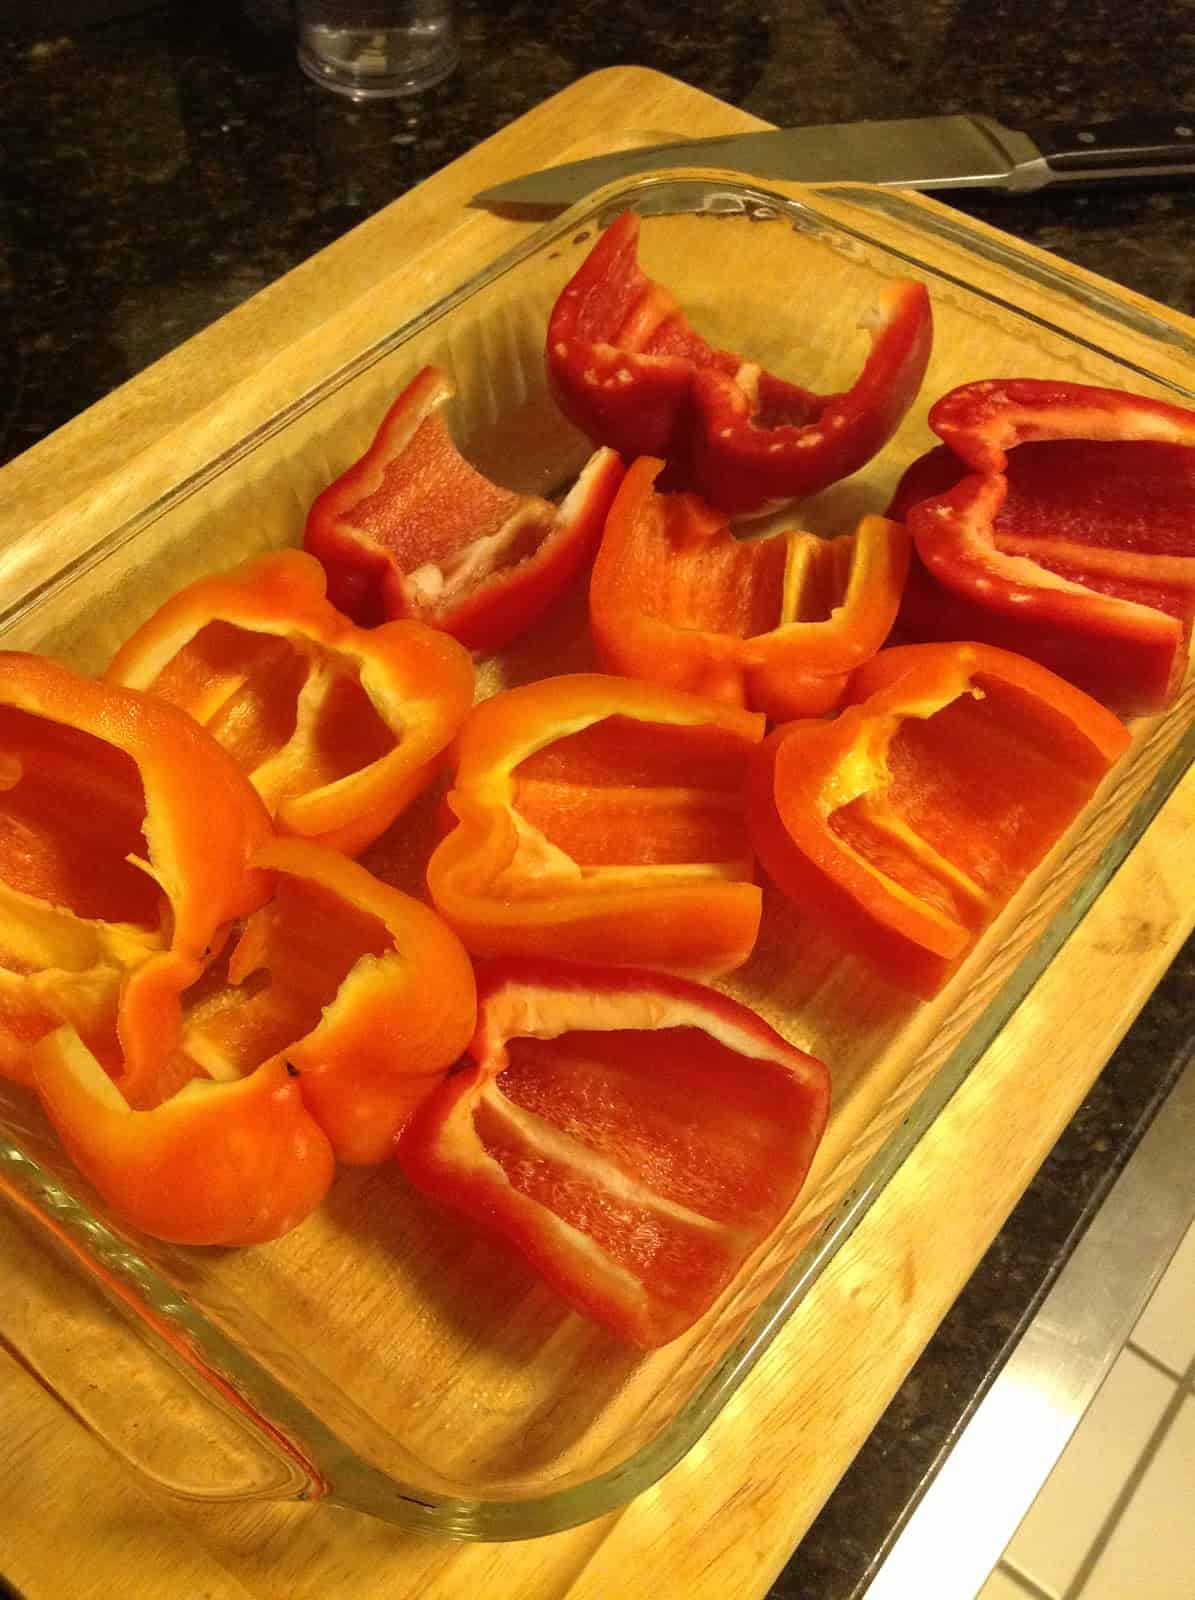 Peppers - ready for stuffing